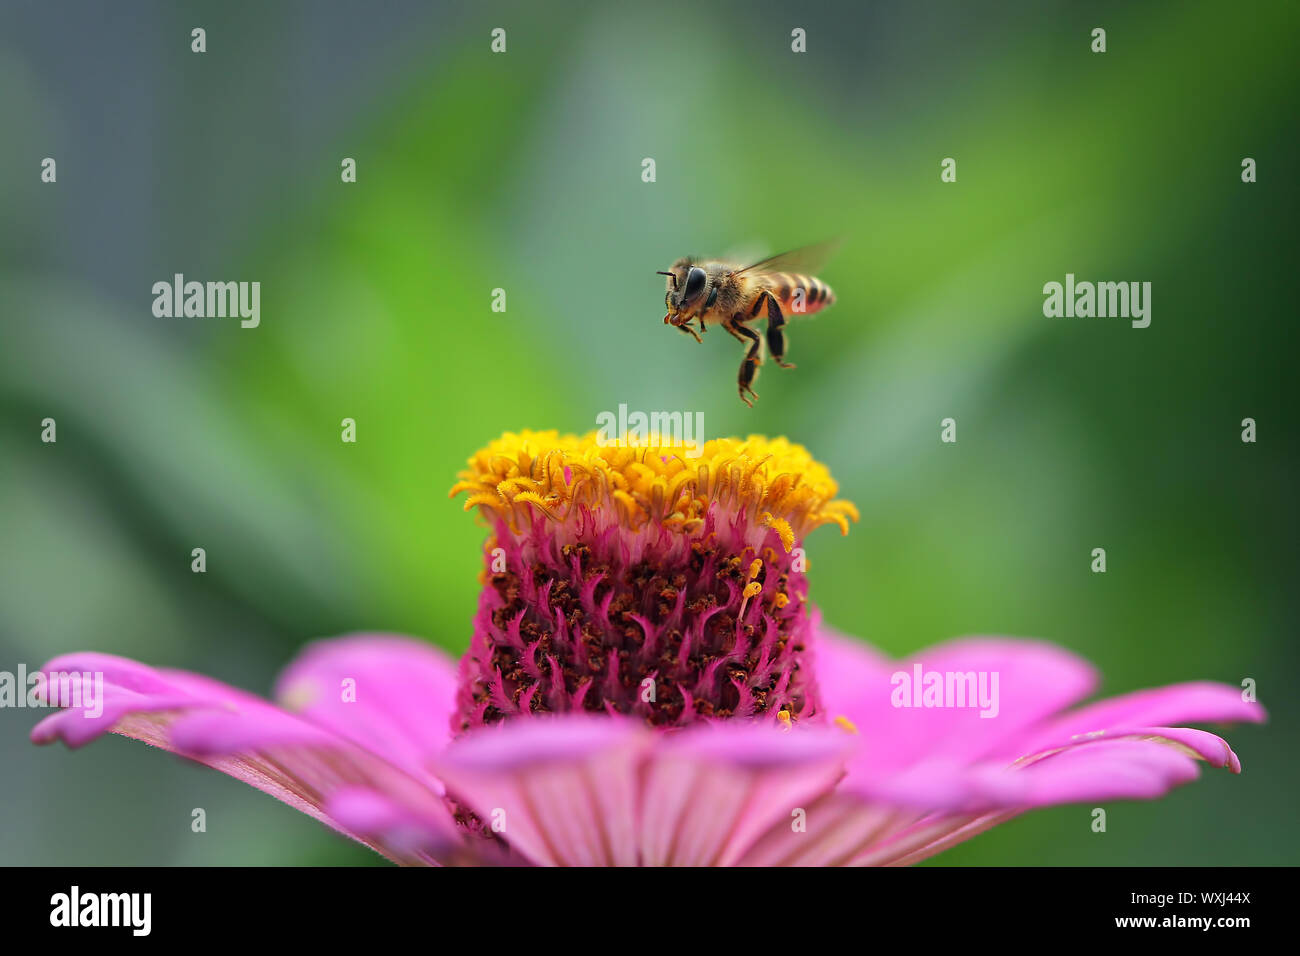 Bee hovering over a flower, Indonesia Stock Photo